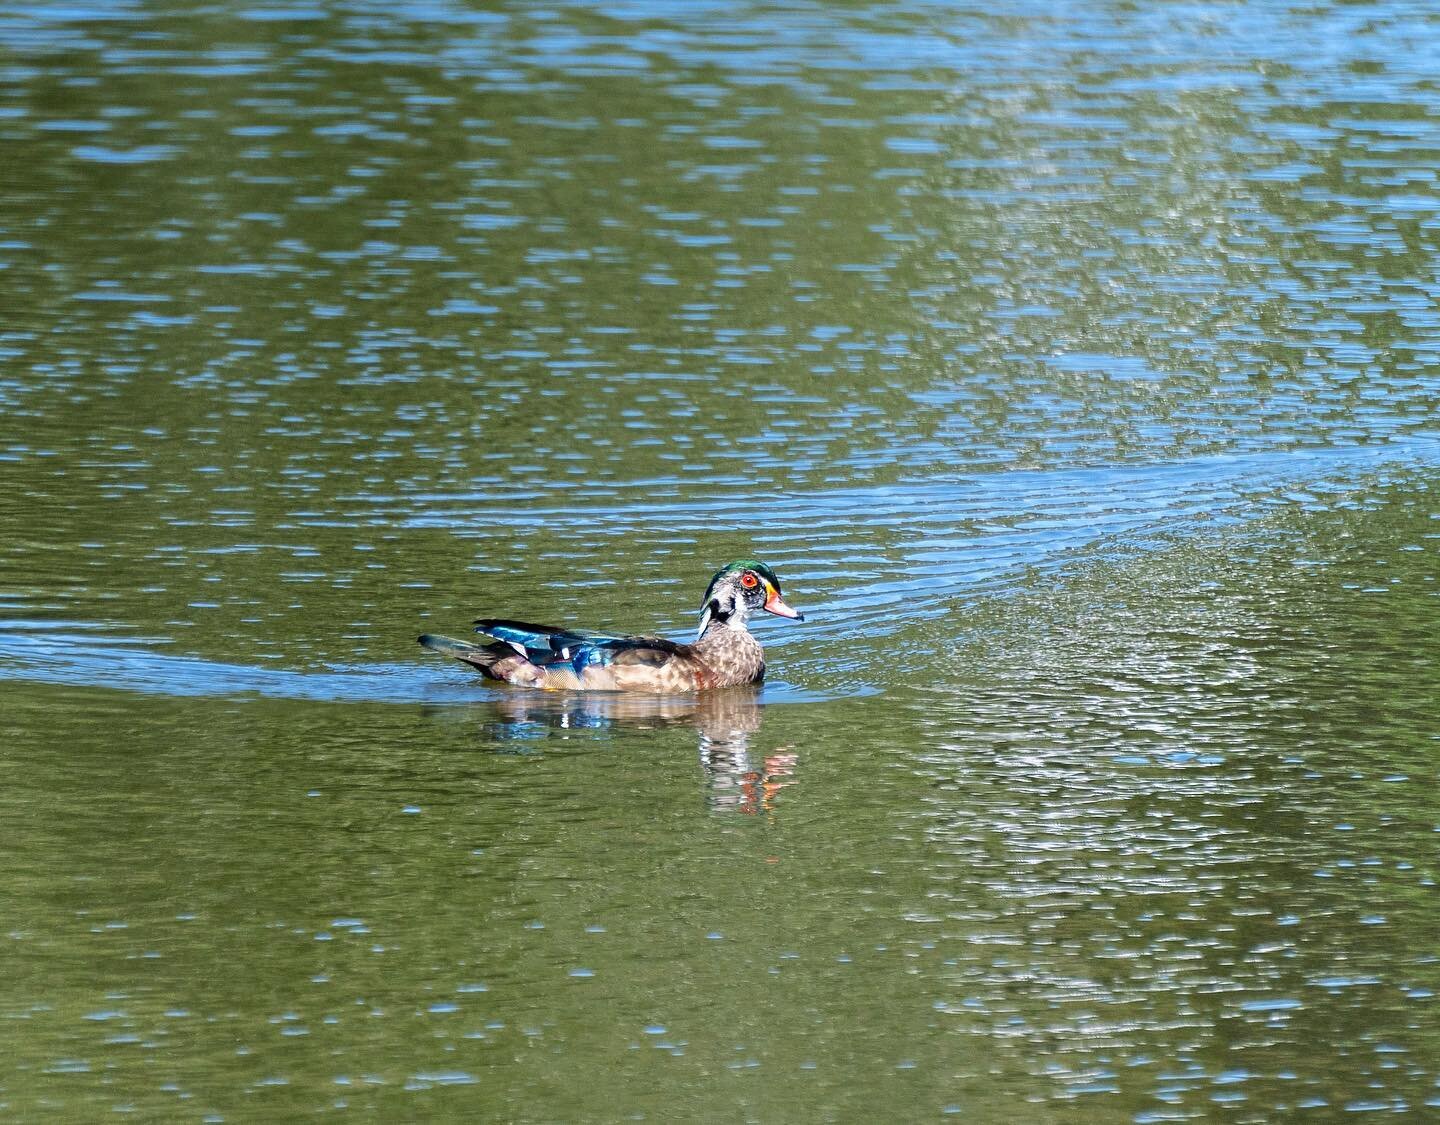 Wood duck (Aix sponsa)

These splendid ducks boast intricate plumage. Males have an iridescent green crested head, chestnut breast, red eyes, and other bold markings. Females are warm brown with a distinguishing white teardrop around the eye and edgi